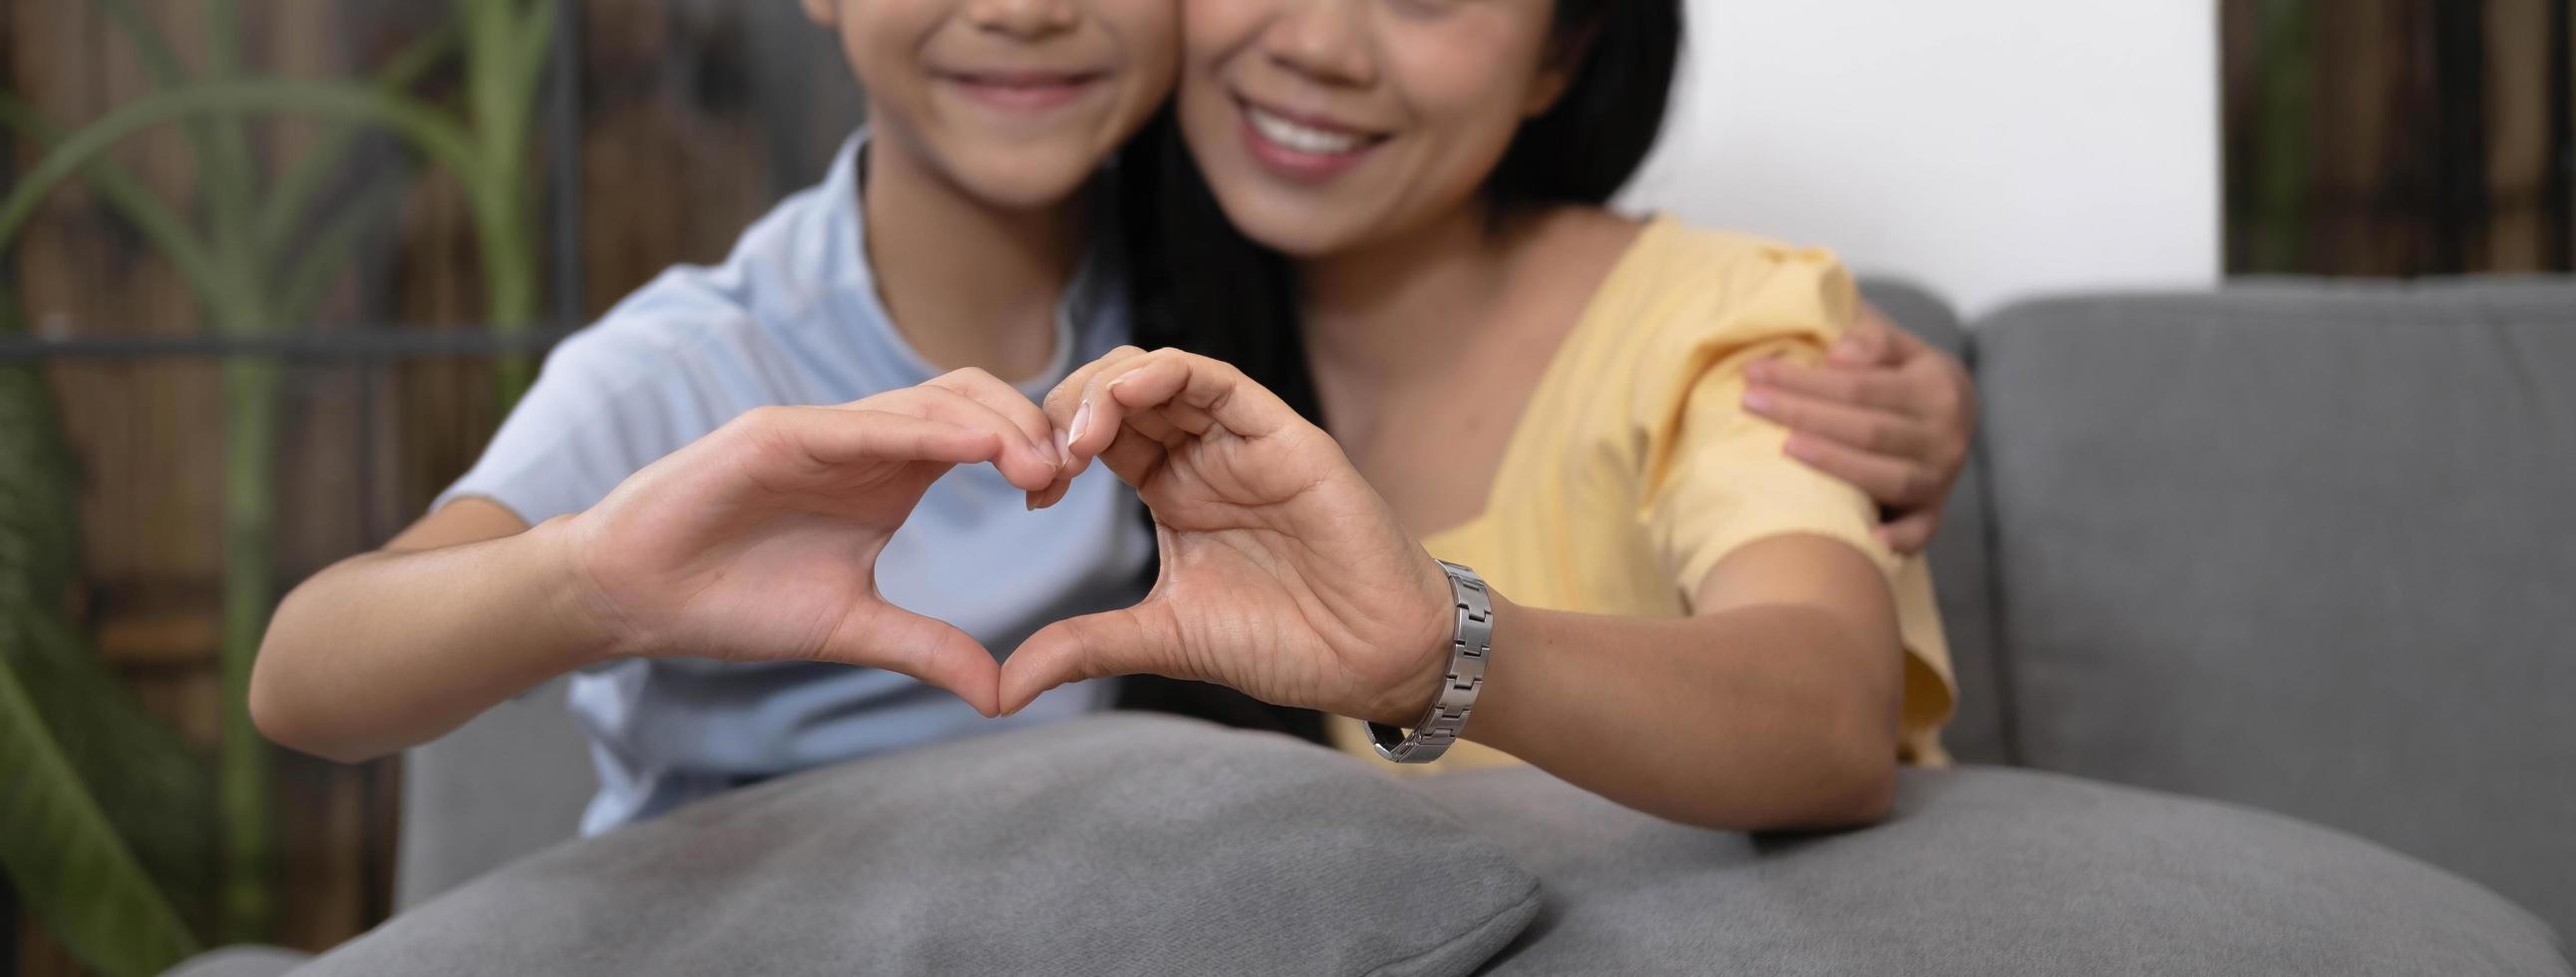 Asian mother and daughter making heart with their hands and smiling to camera. Life insurance, love and support in family relationships concept photo